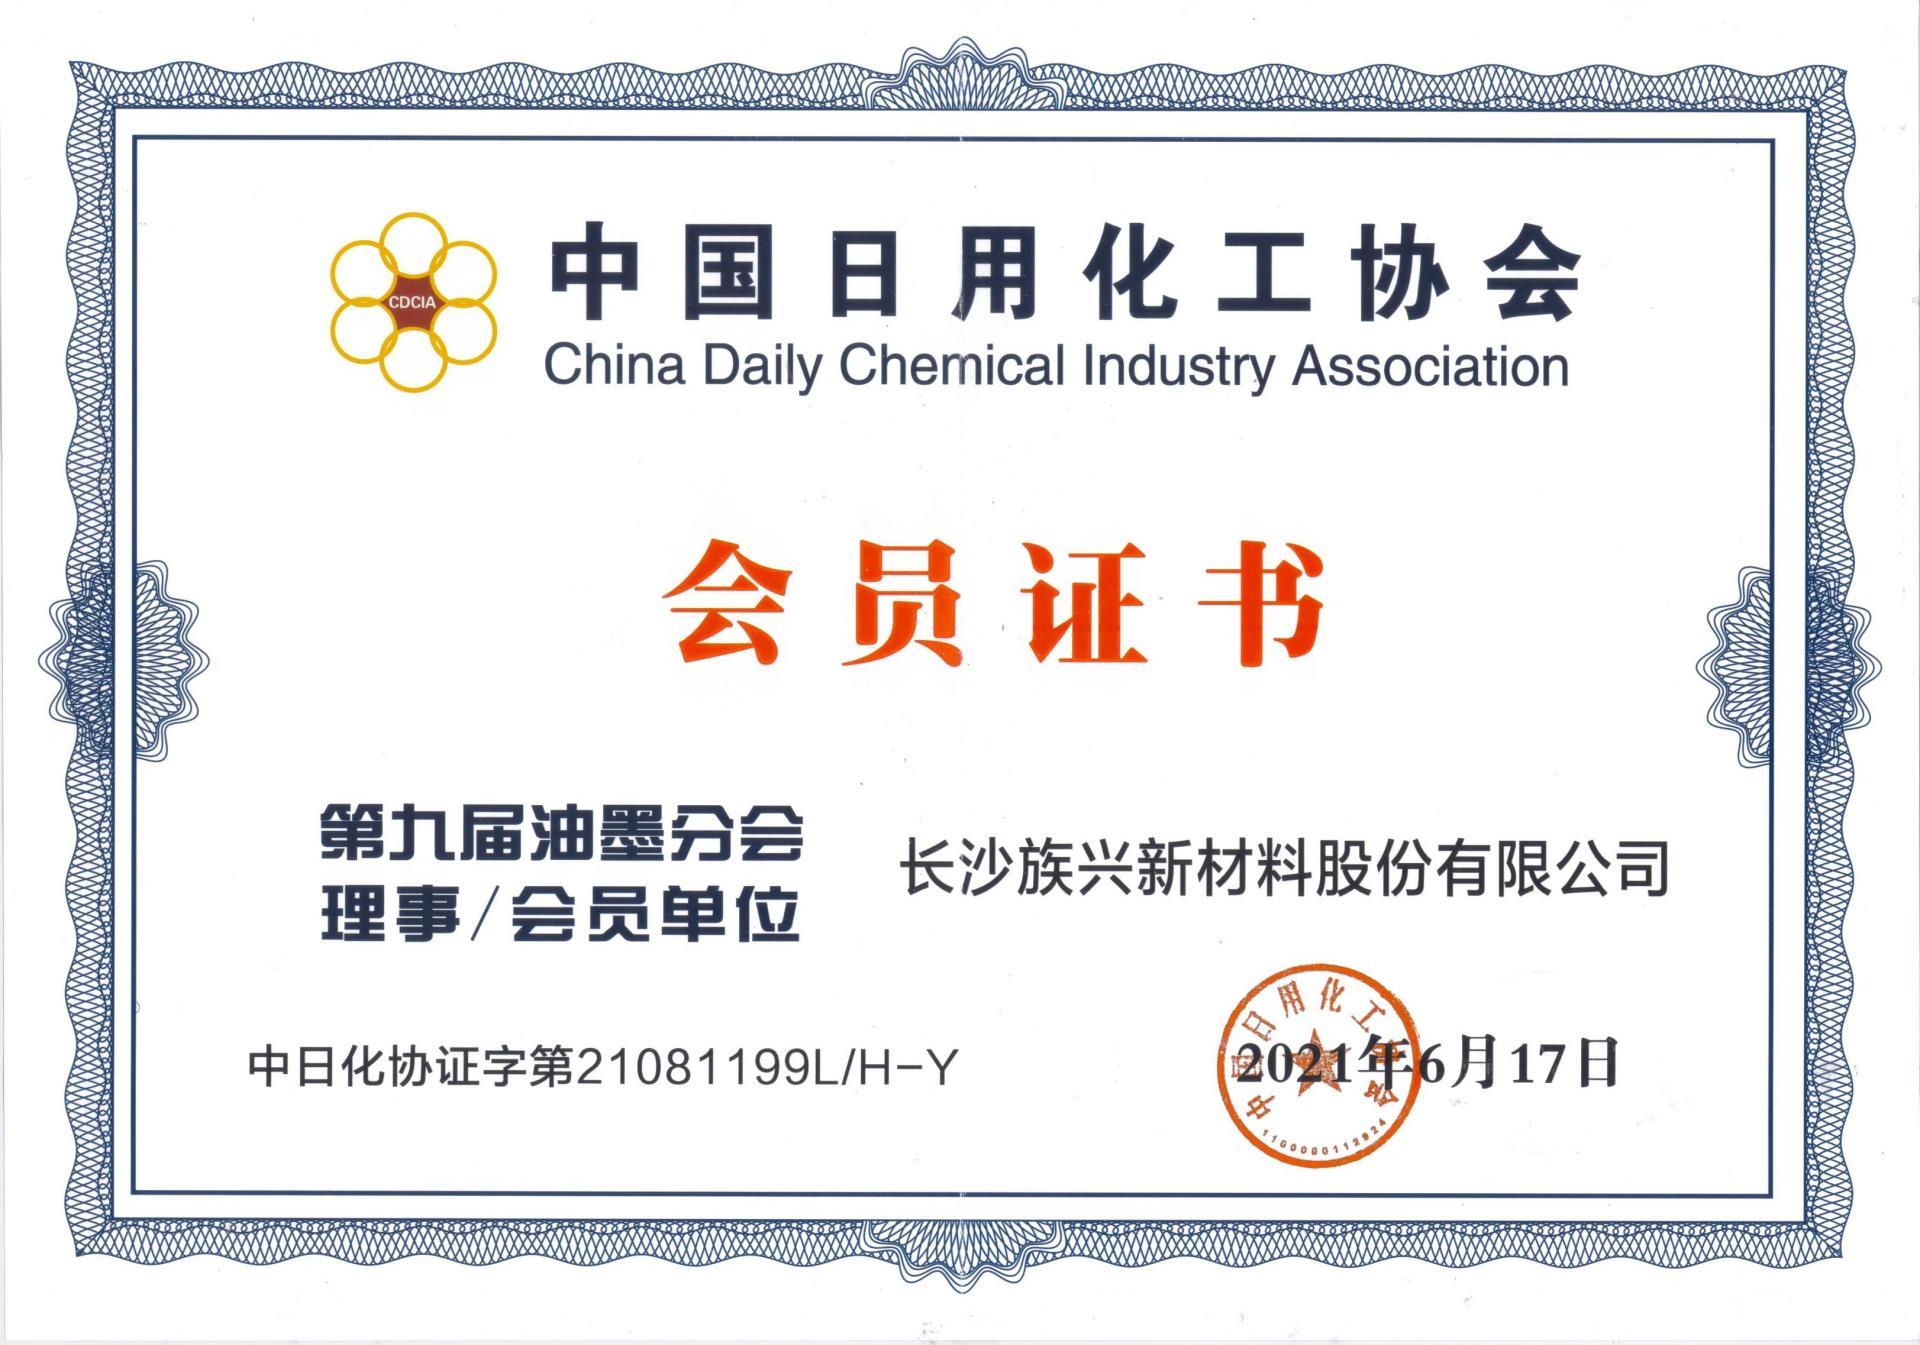 Membership certificate of China Daily Chemical Industry Association